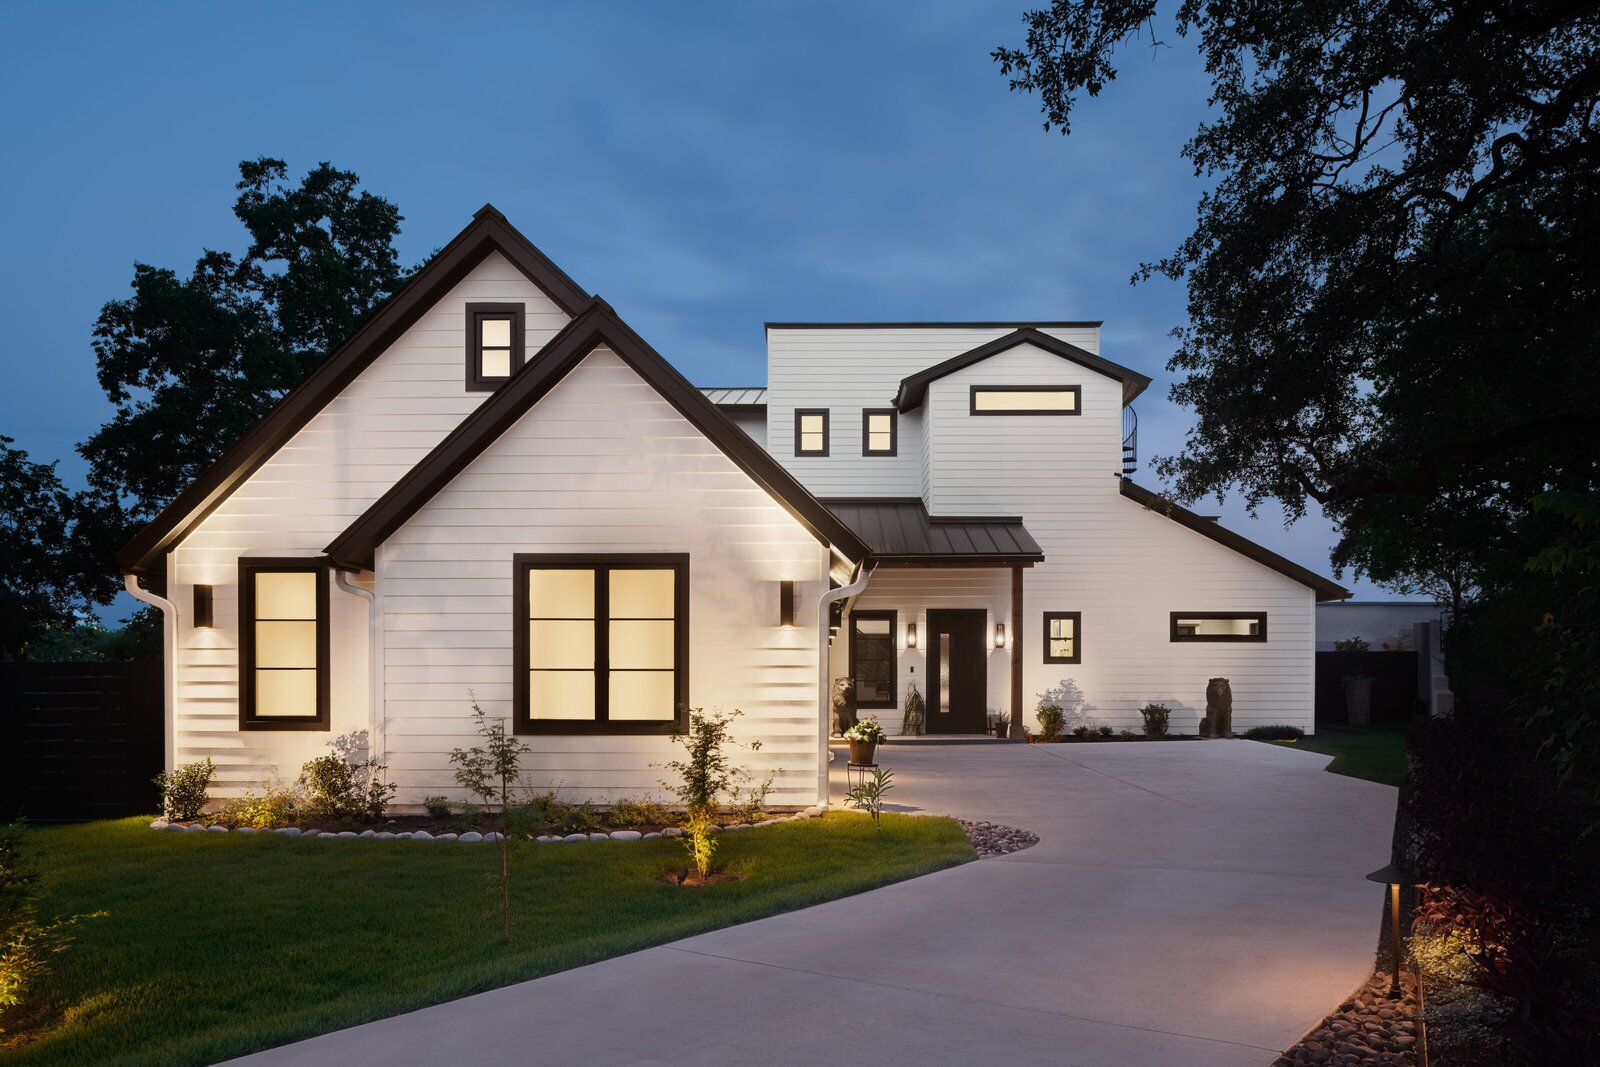 custom home builders in austin texas, luxury homes in central texas, modern architecture